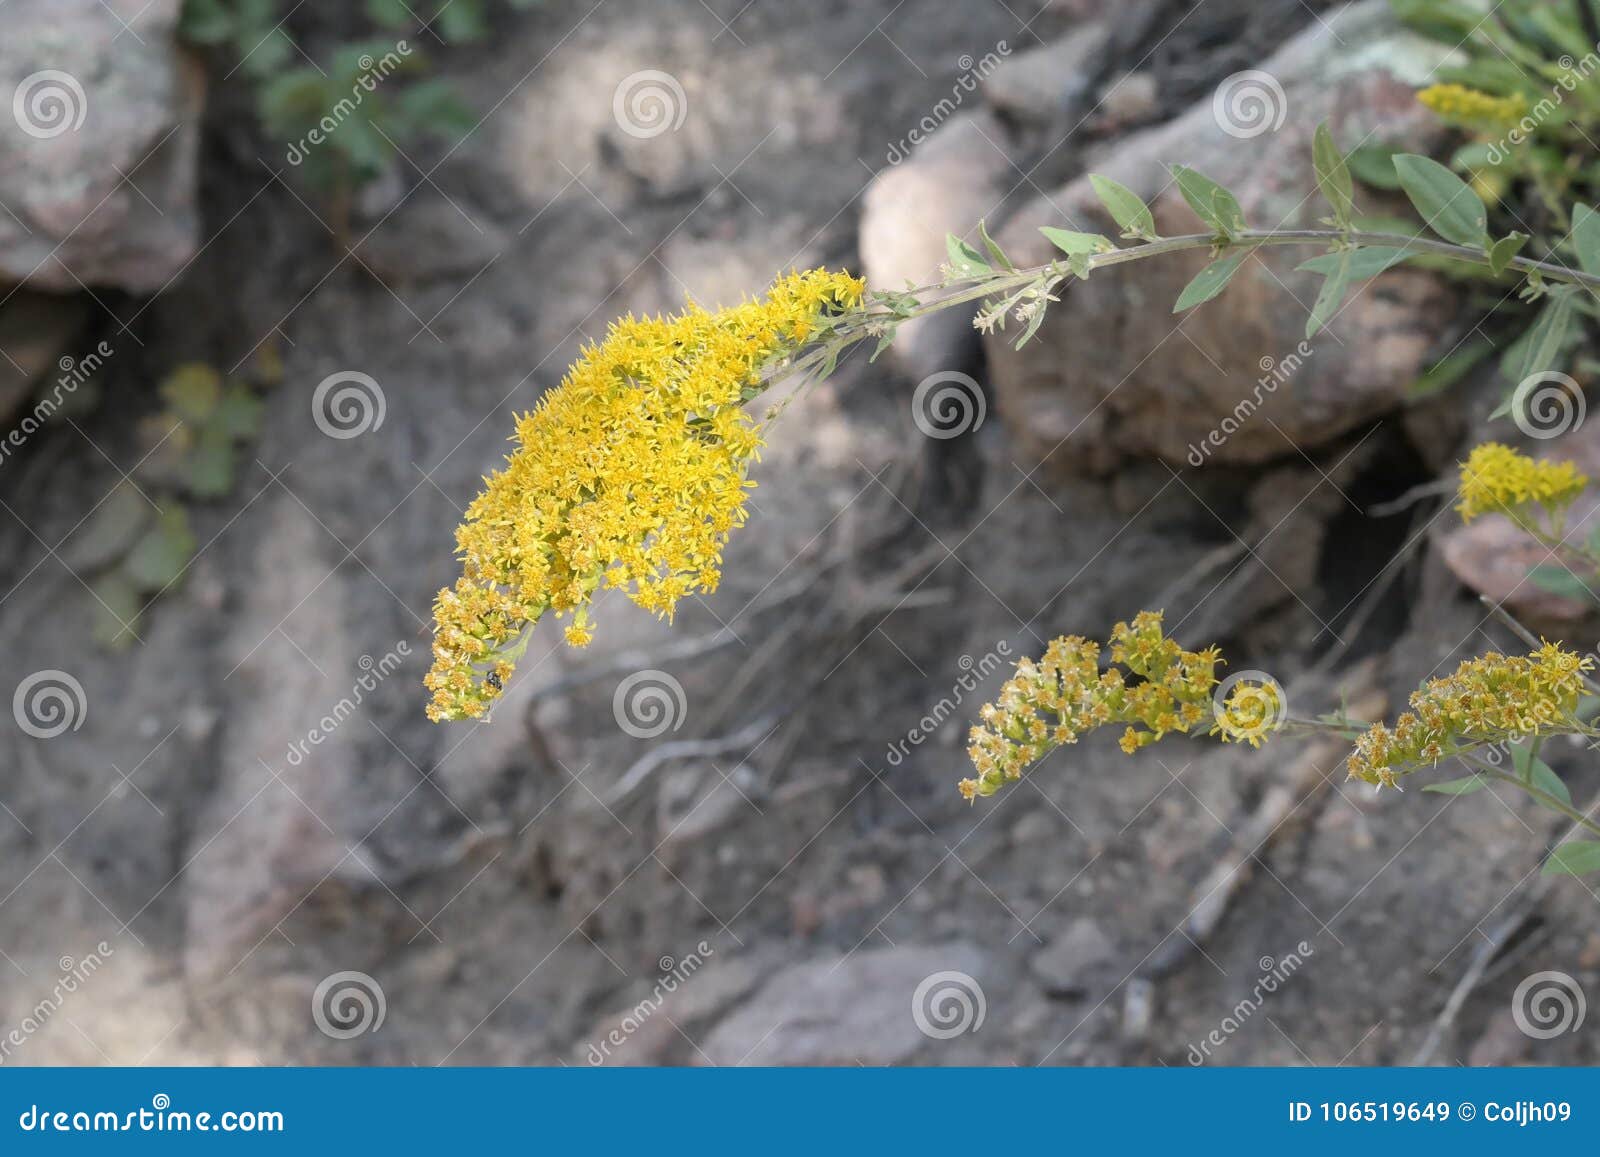 Rocky Mountain Goldenrod Stock Image Image Of Medicinal 106519649